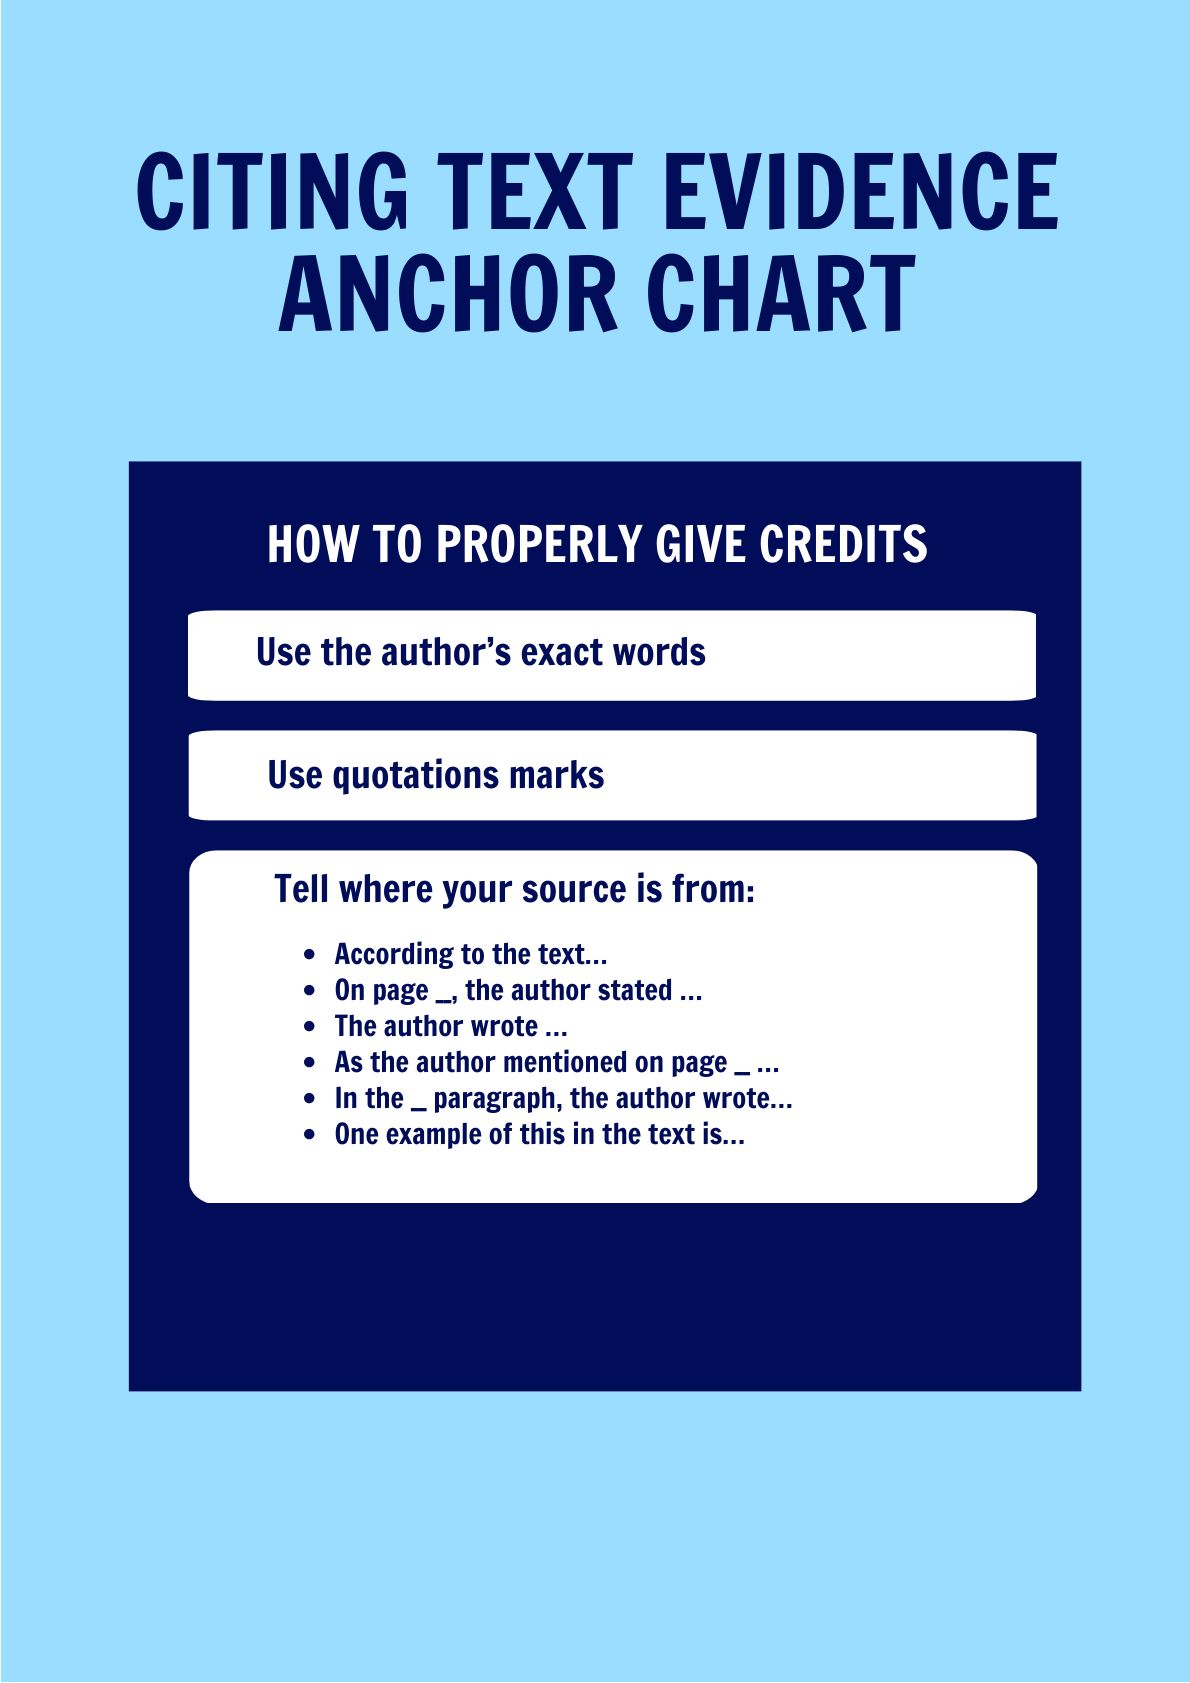 free-citing-text-evidence-anchor-chart-download-in-pdf-illustrator-template